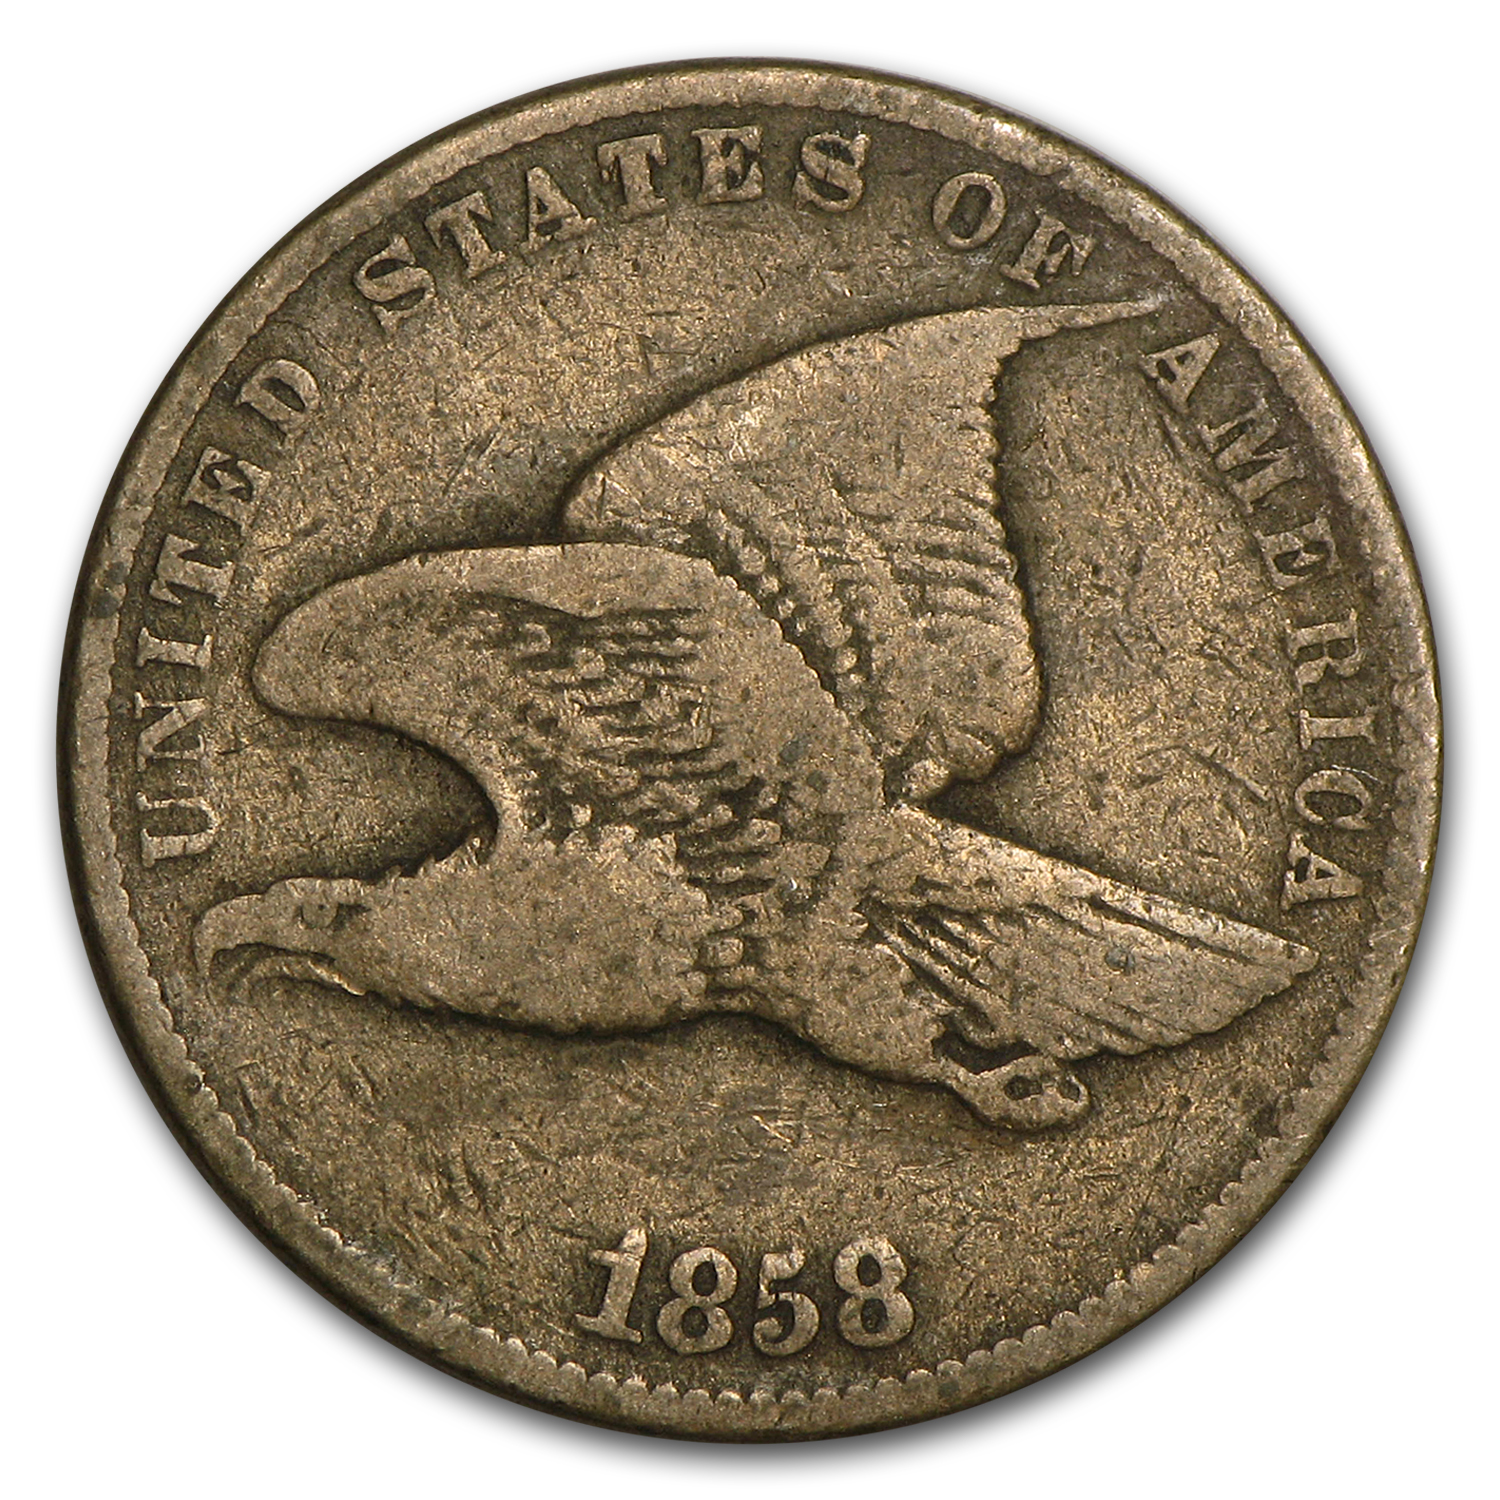 Buy 1858 Flying Eagle Cent Small Letters Fine